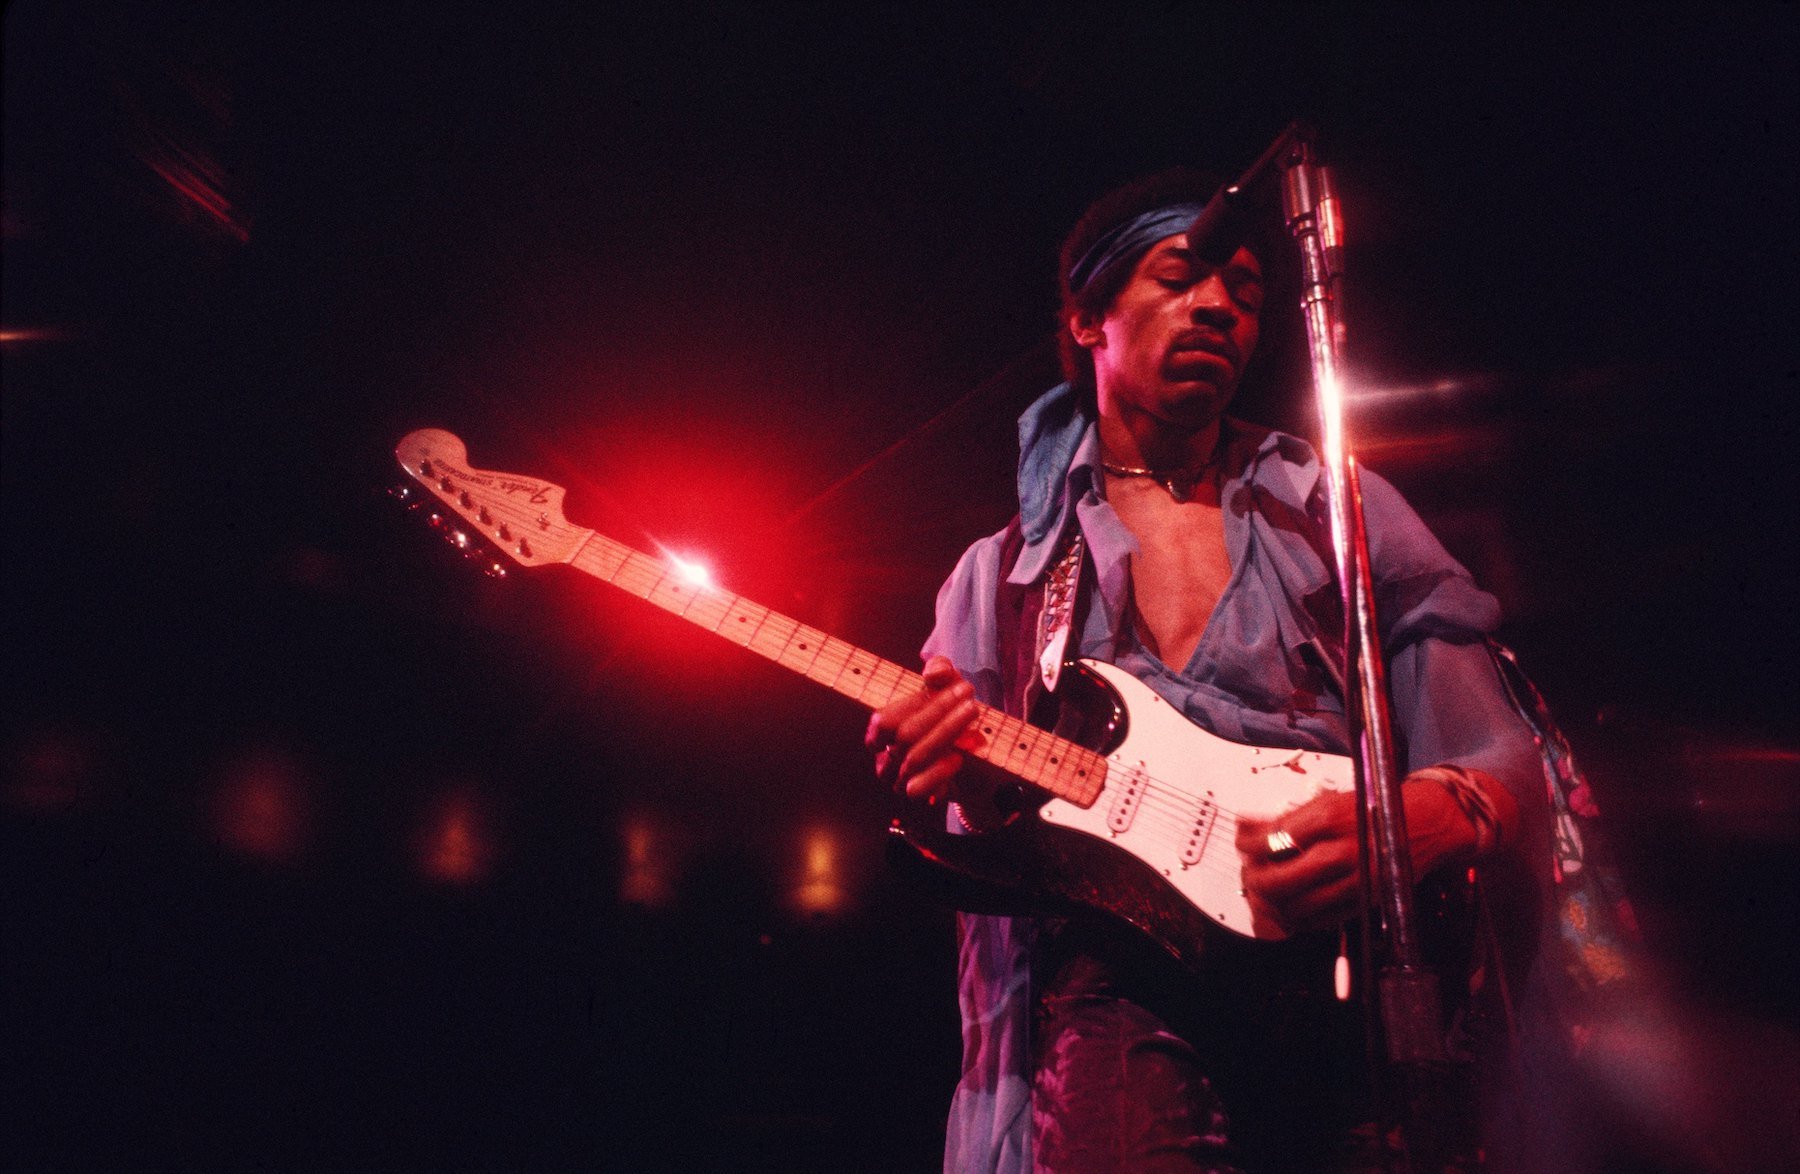 Jimi Hendrix, whose brother used to help him spy on girls, playing guitar